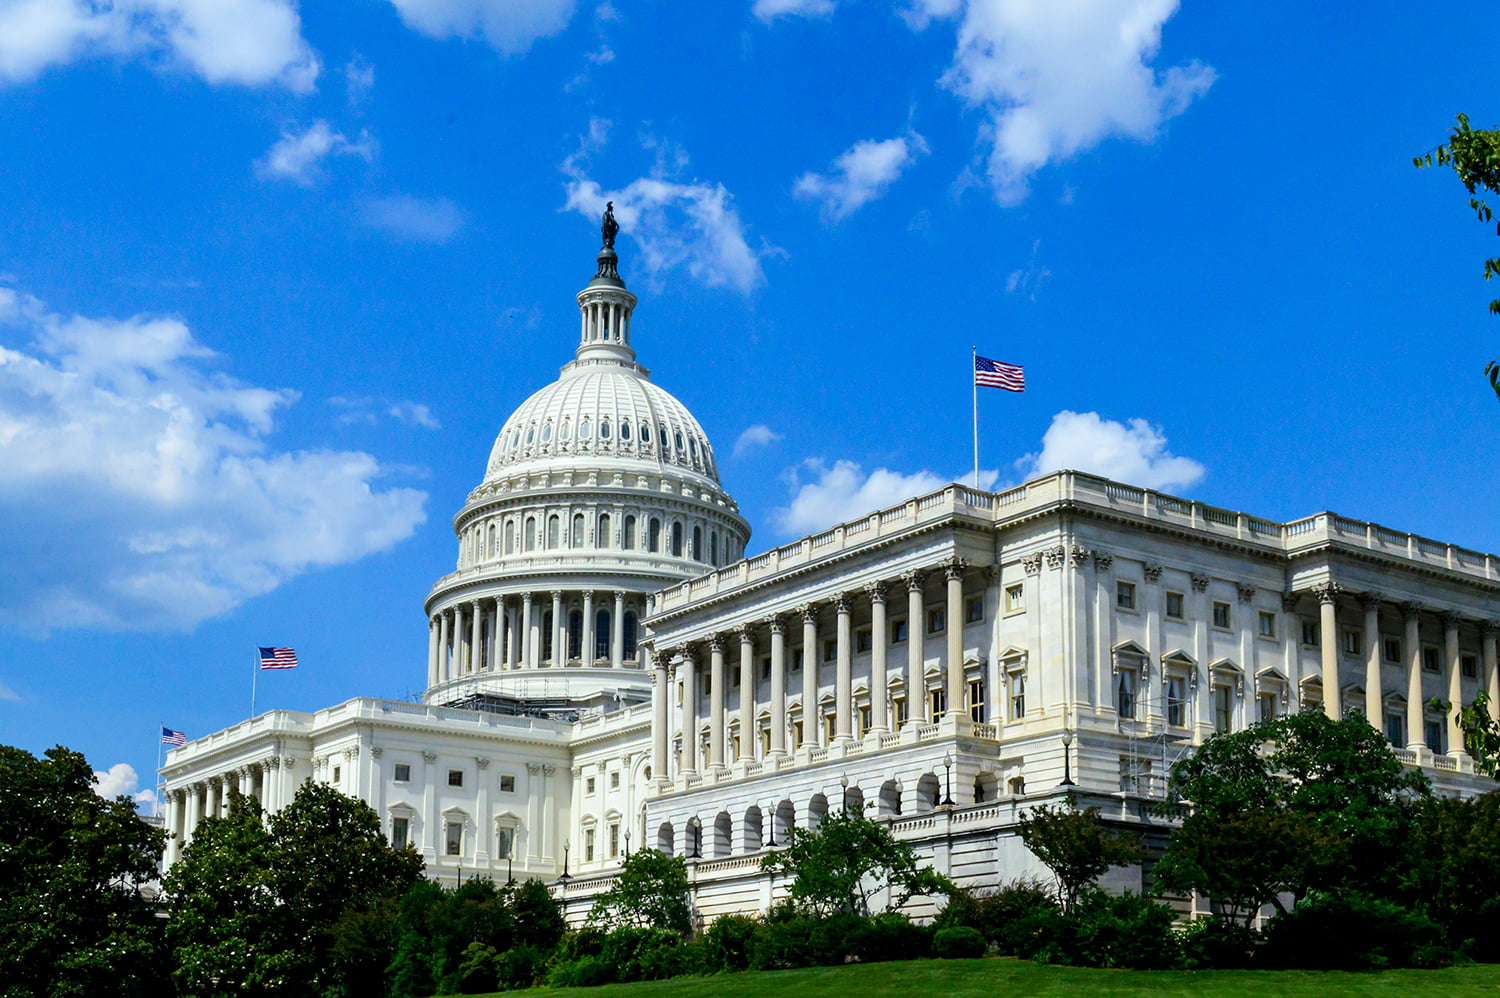 United States Capitol Building with a clear blue sky